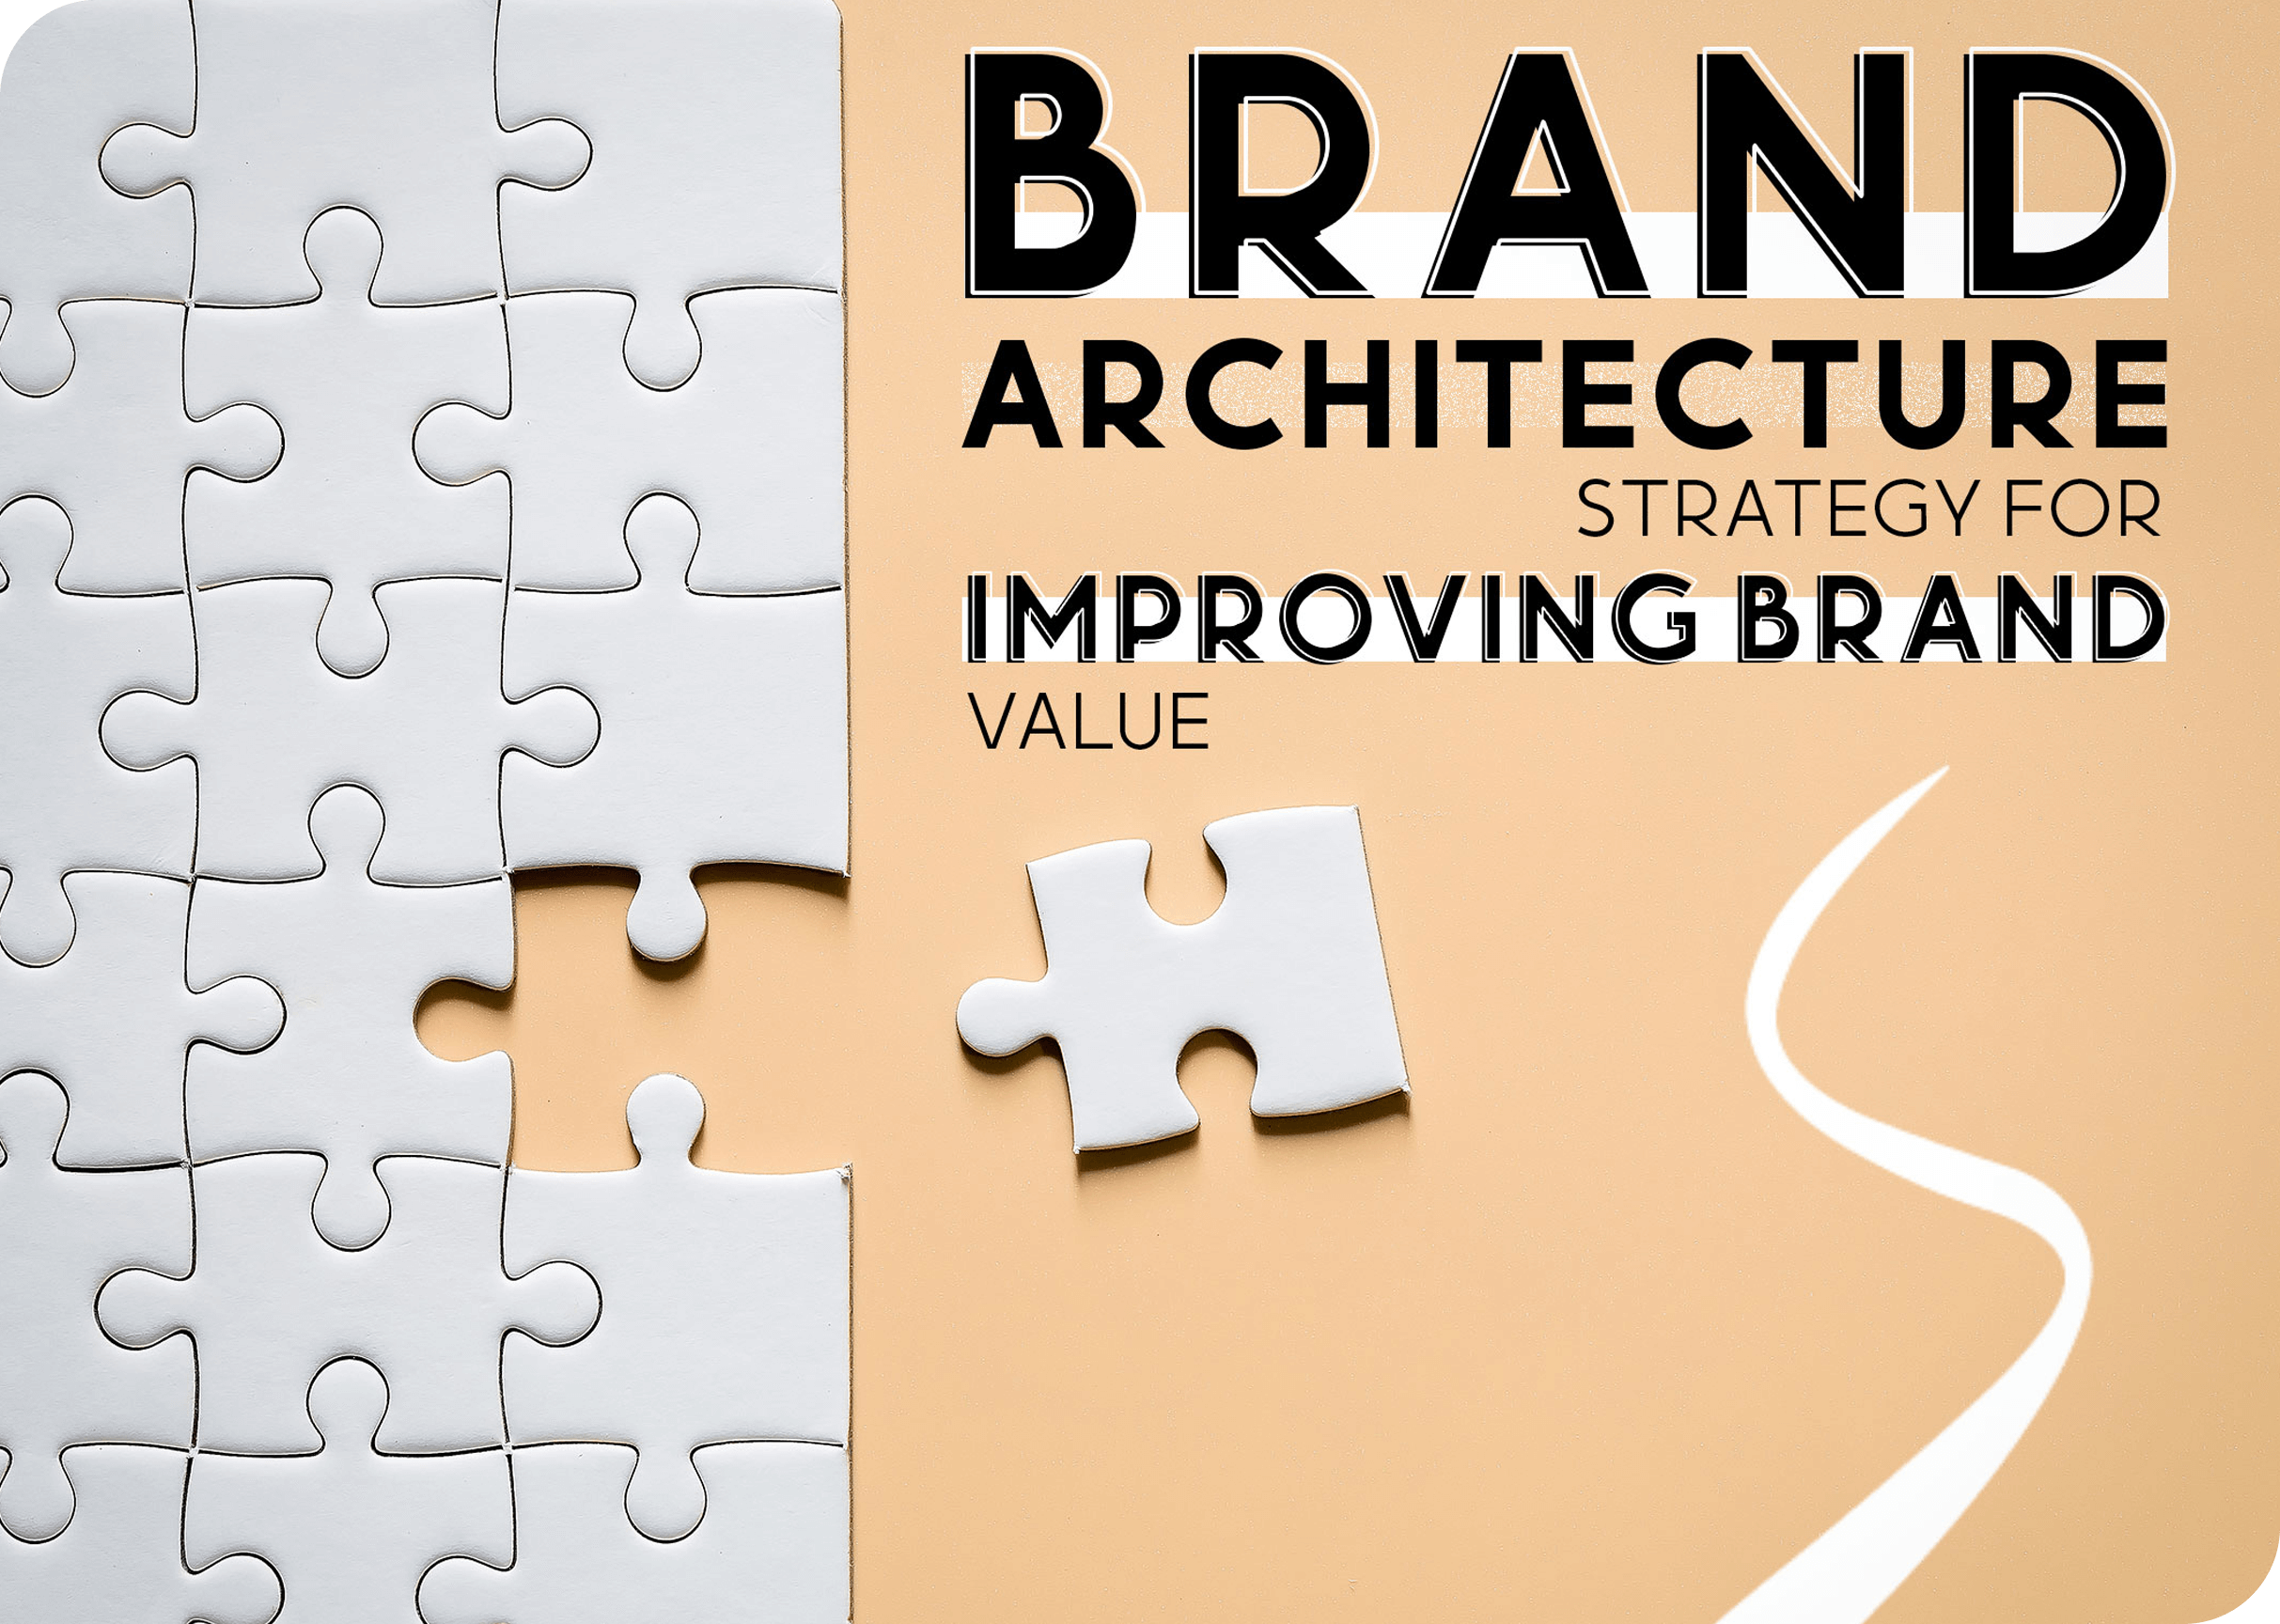 Brand Architecture Strategy for Improving Brand Value...